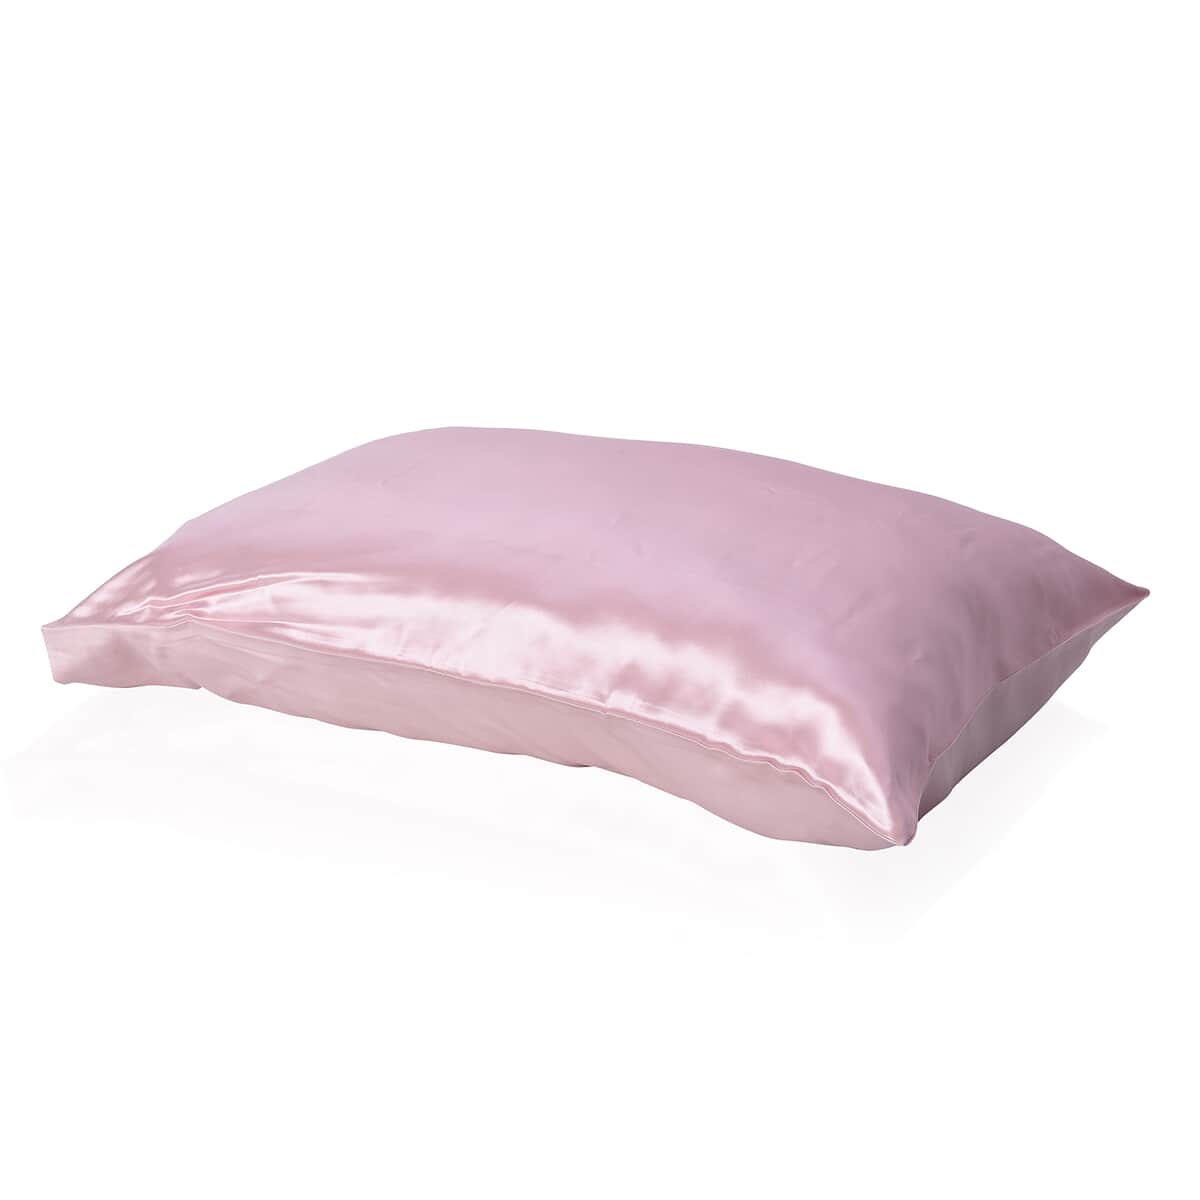 Symphony Home Pink 100% Mulberry Silk Pillowcase Infused with Hyaluronic Acid & Argan Oil - King, Pillow Protectors, Pillow Cover, Cushion Cover, Pillow Shams, Pillow Case Covers image number 1